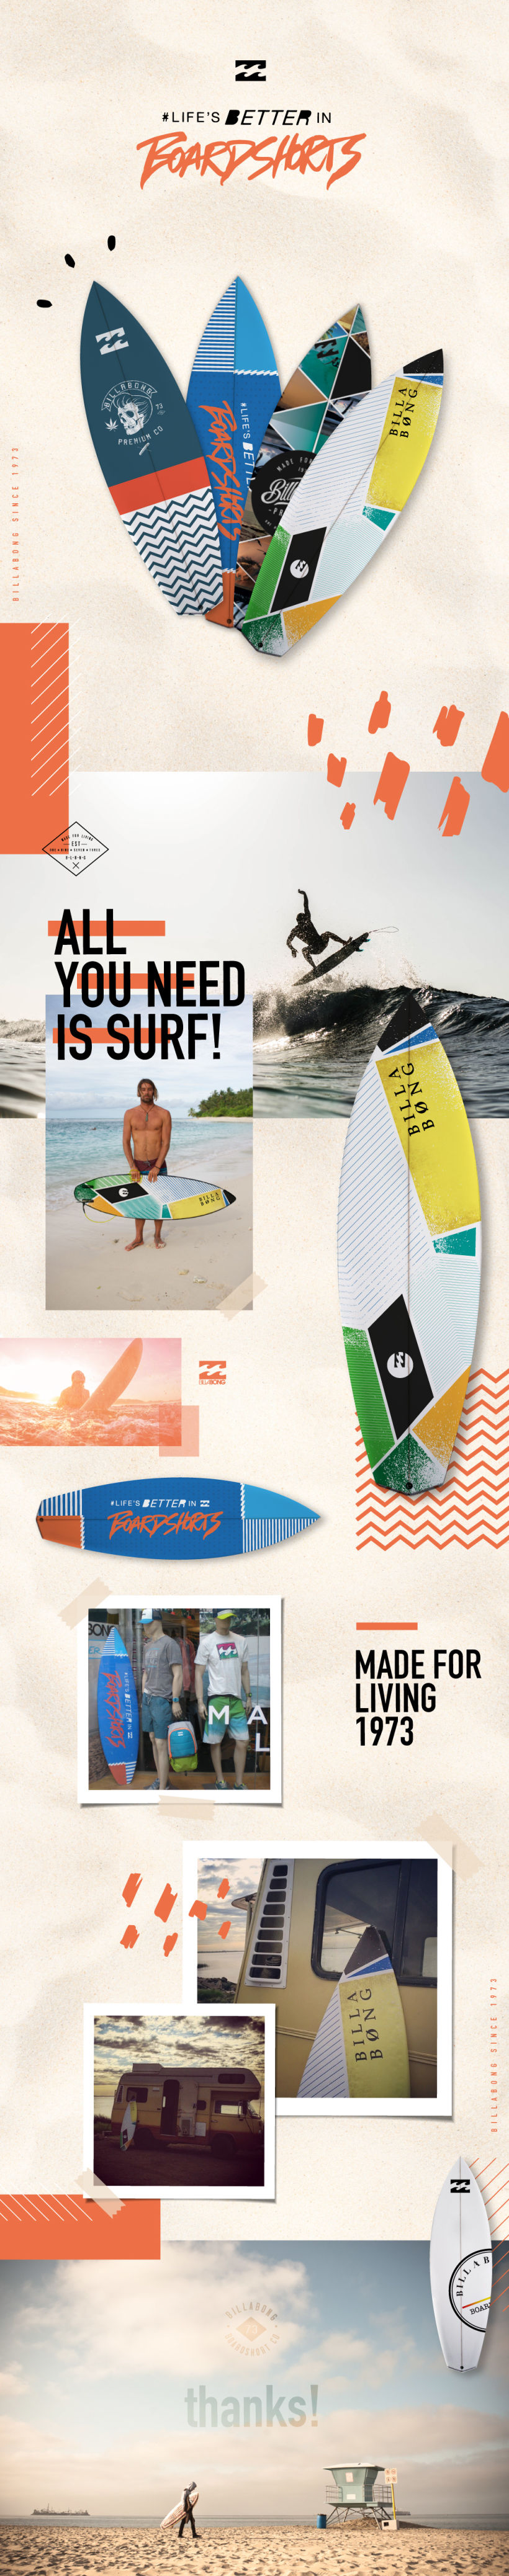 Designs of surfboards for Billabong. Copyright ©Billabong. All rights reserved.